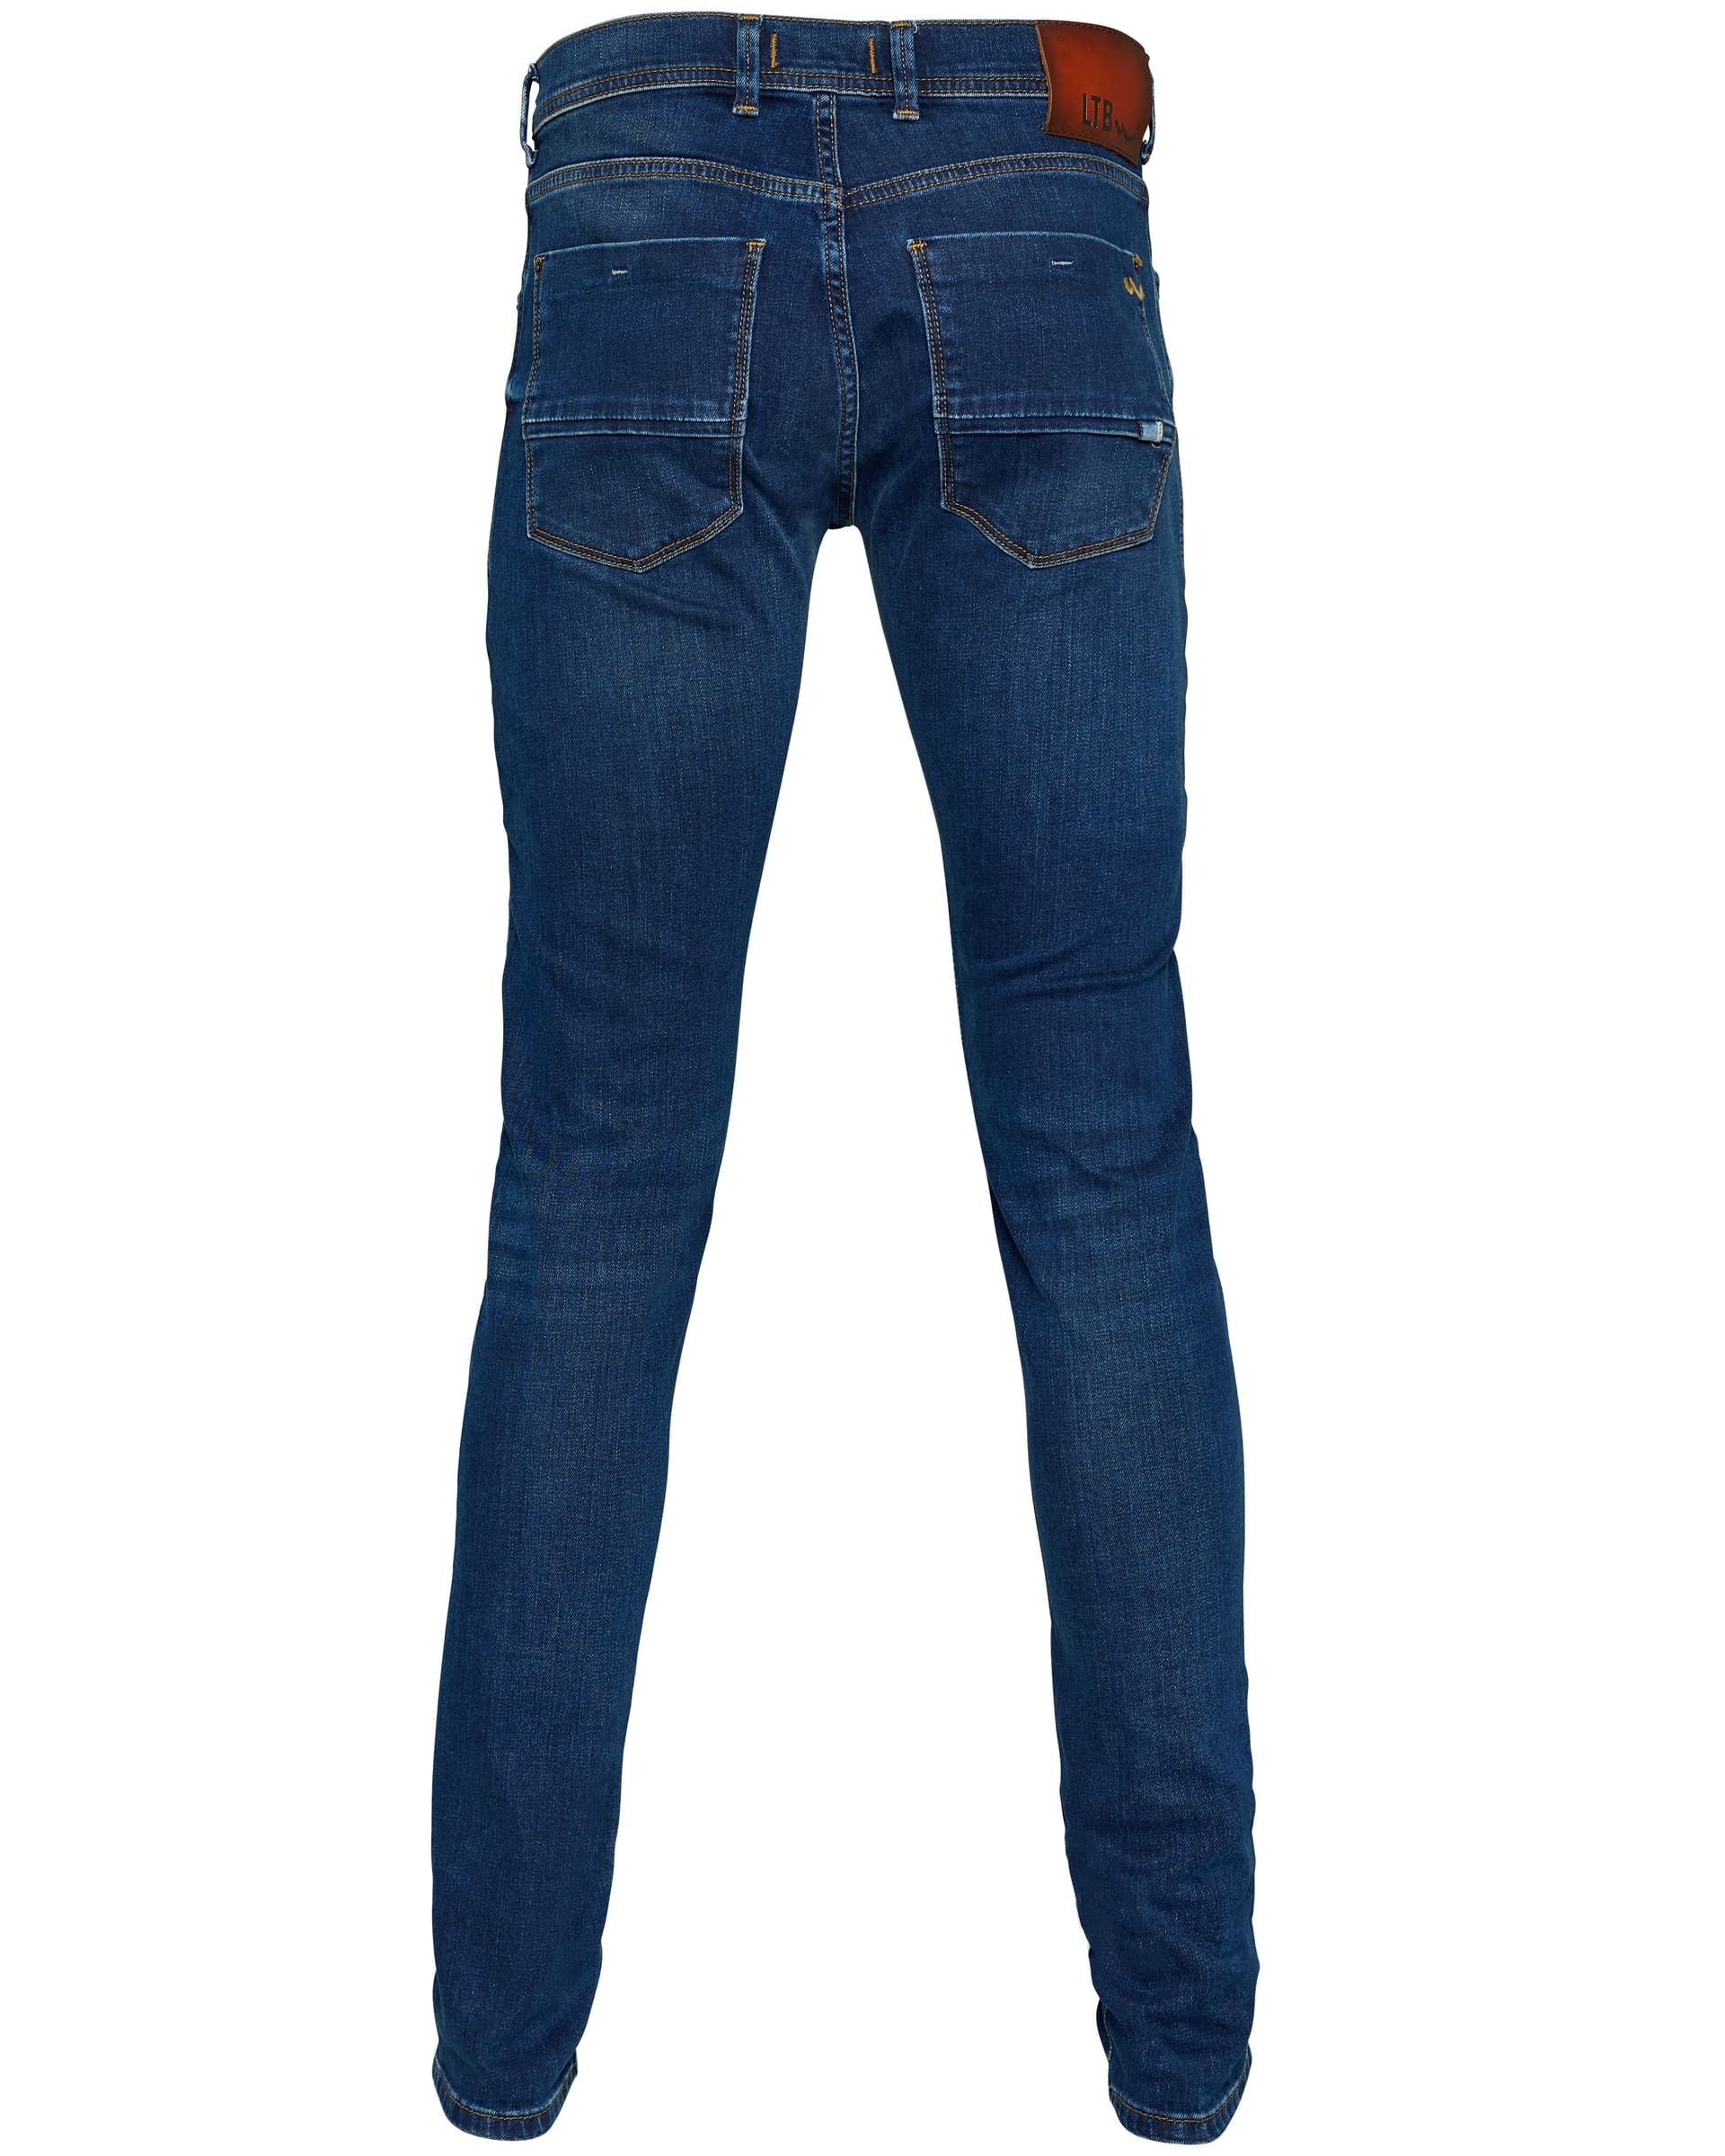 New Diego x Hosea Jean - Men's Jeans at Menzclub